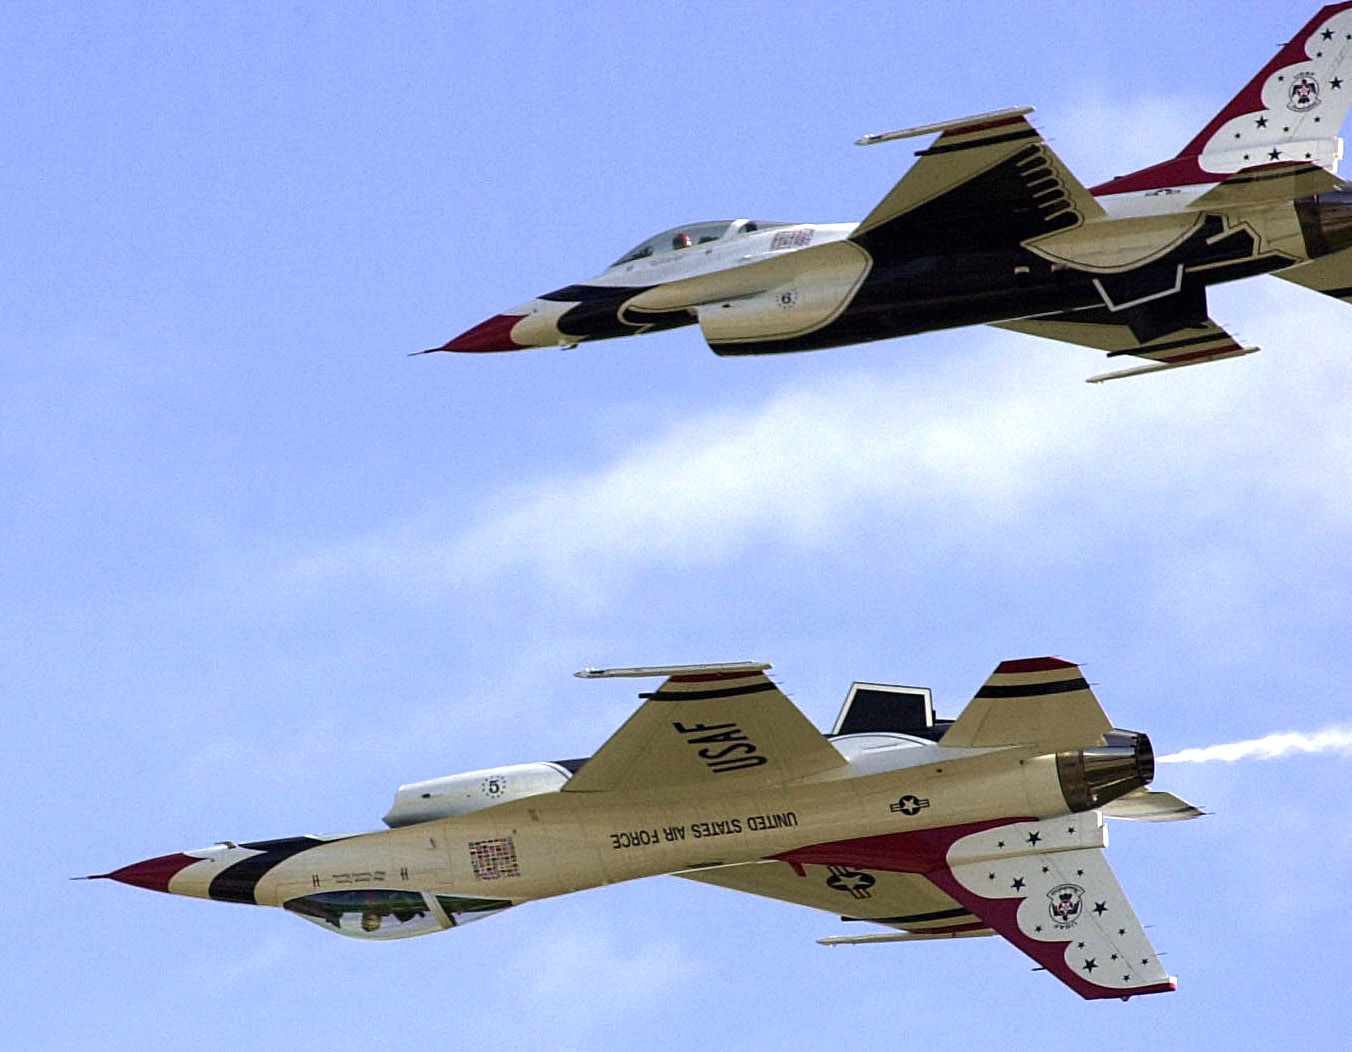 Great Texas Airshow at Joint Base San Antonio to return in April after